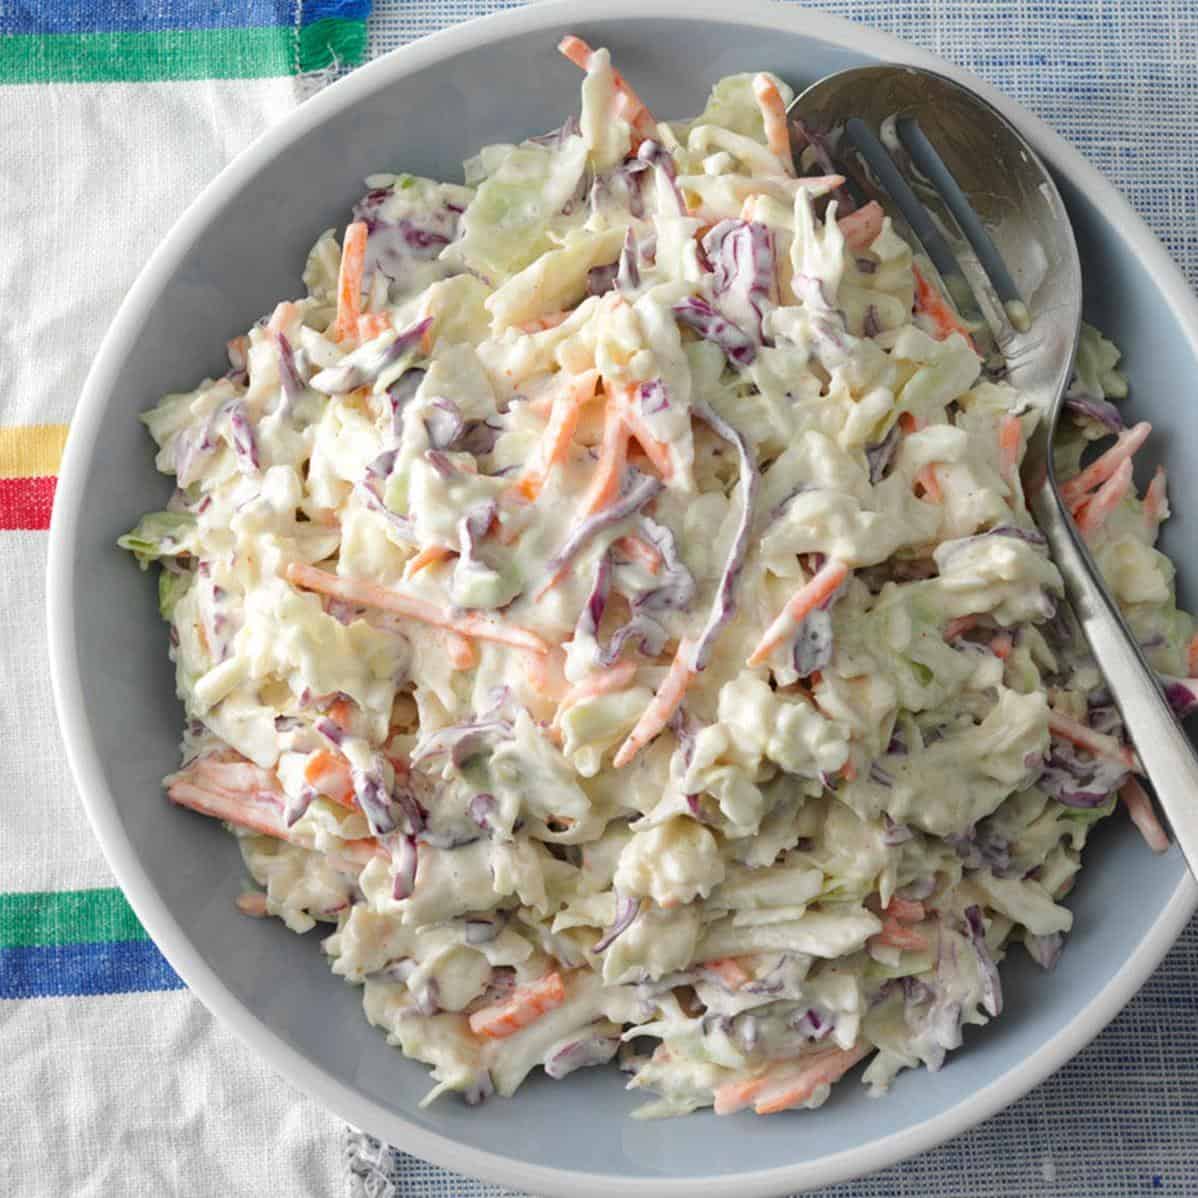 Mouthwatering Creamy Cabbage Salad Recipe for Summer BBQs